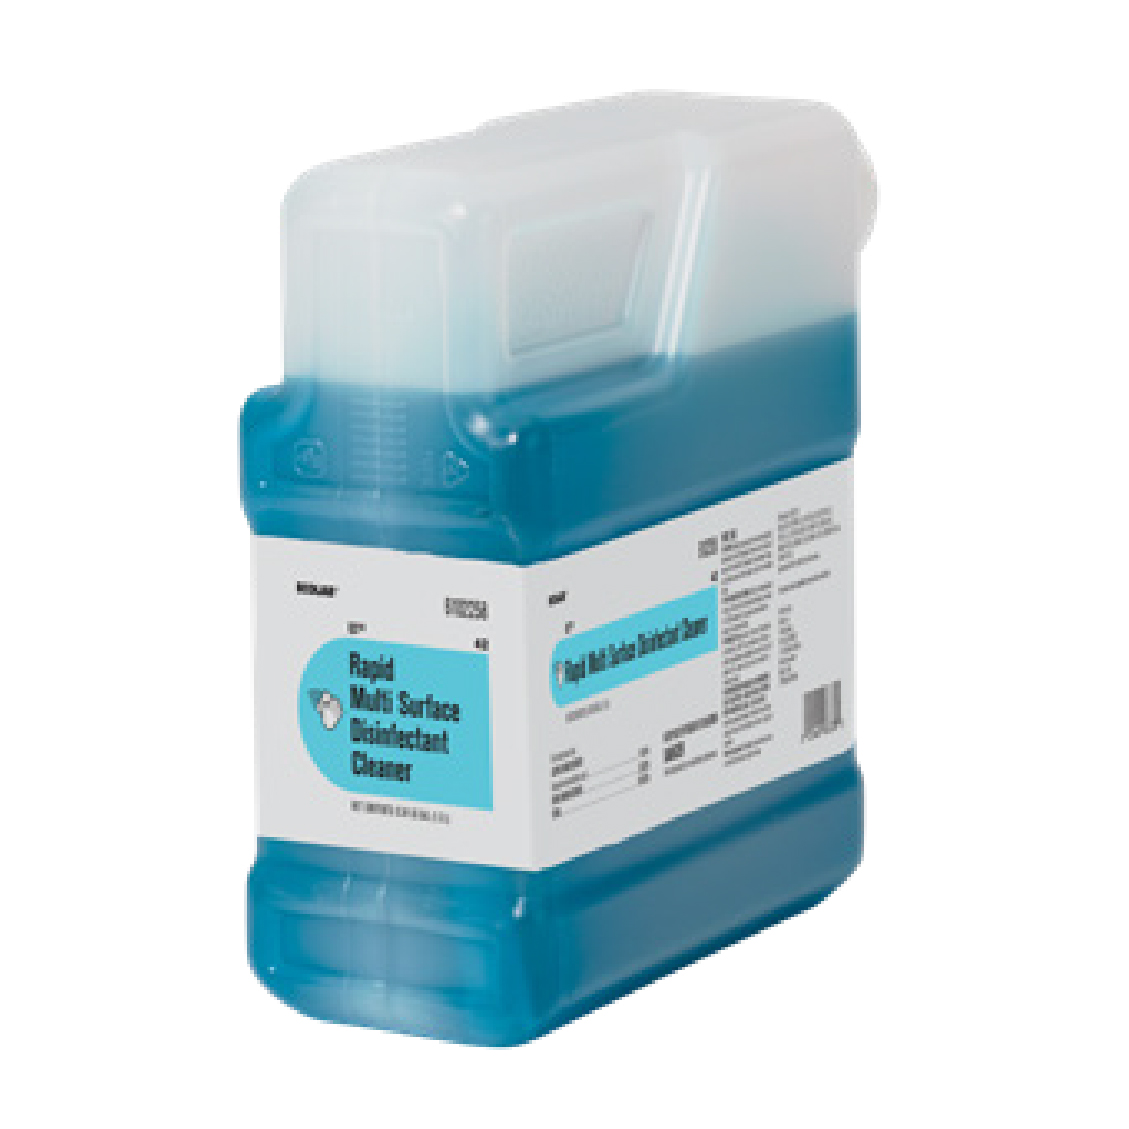 2/1.3L Facilipro Rapid Multi-surface Disinfectant Cleaner